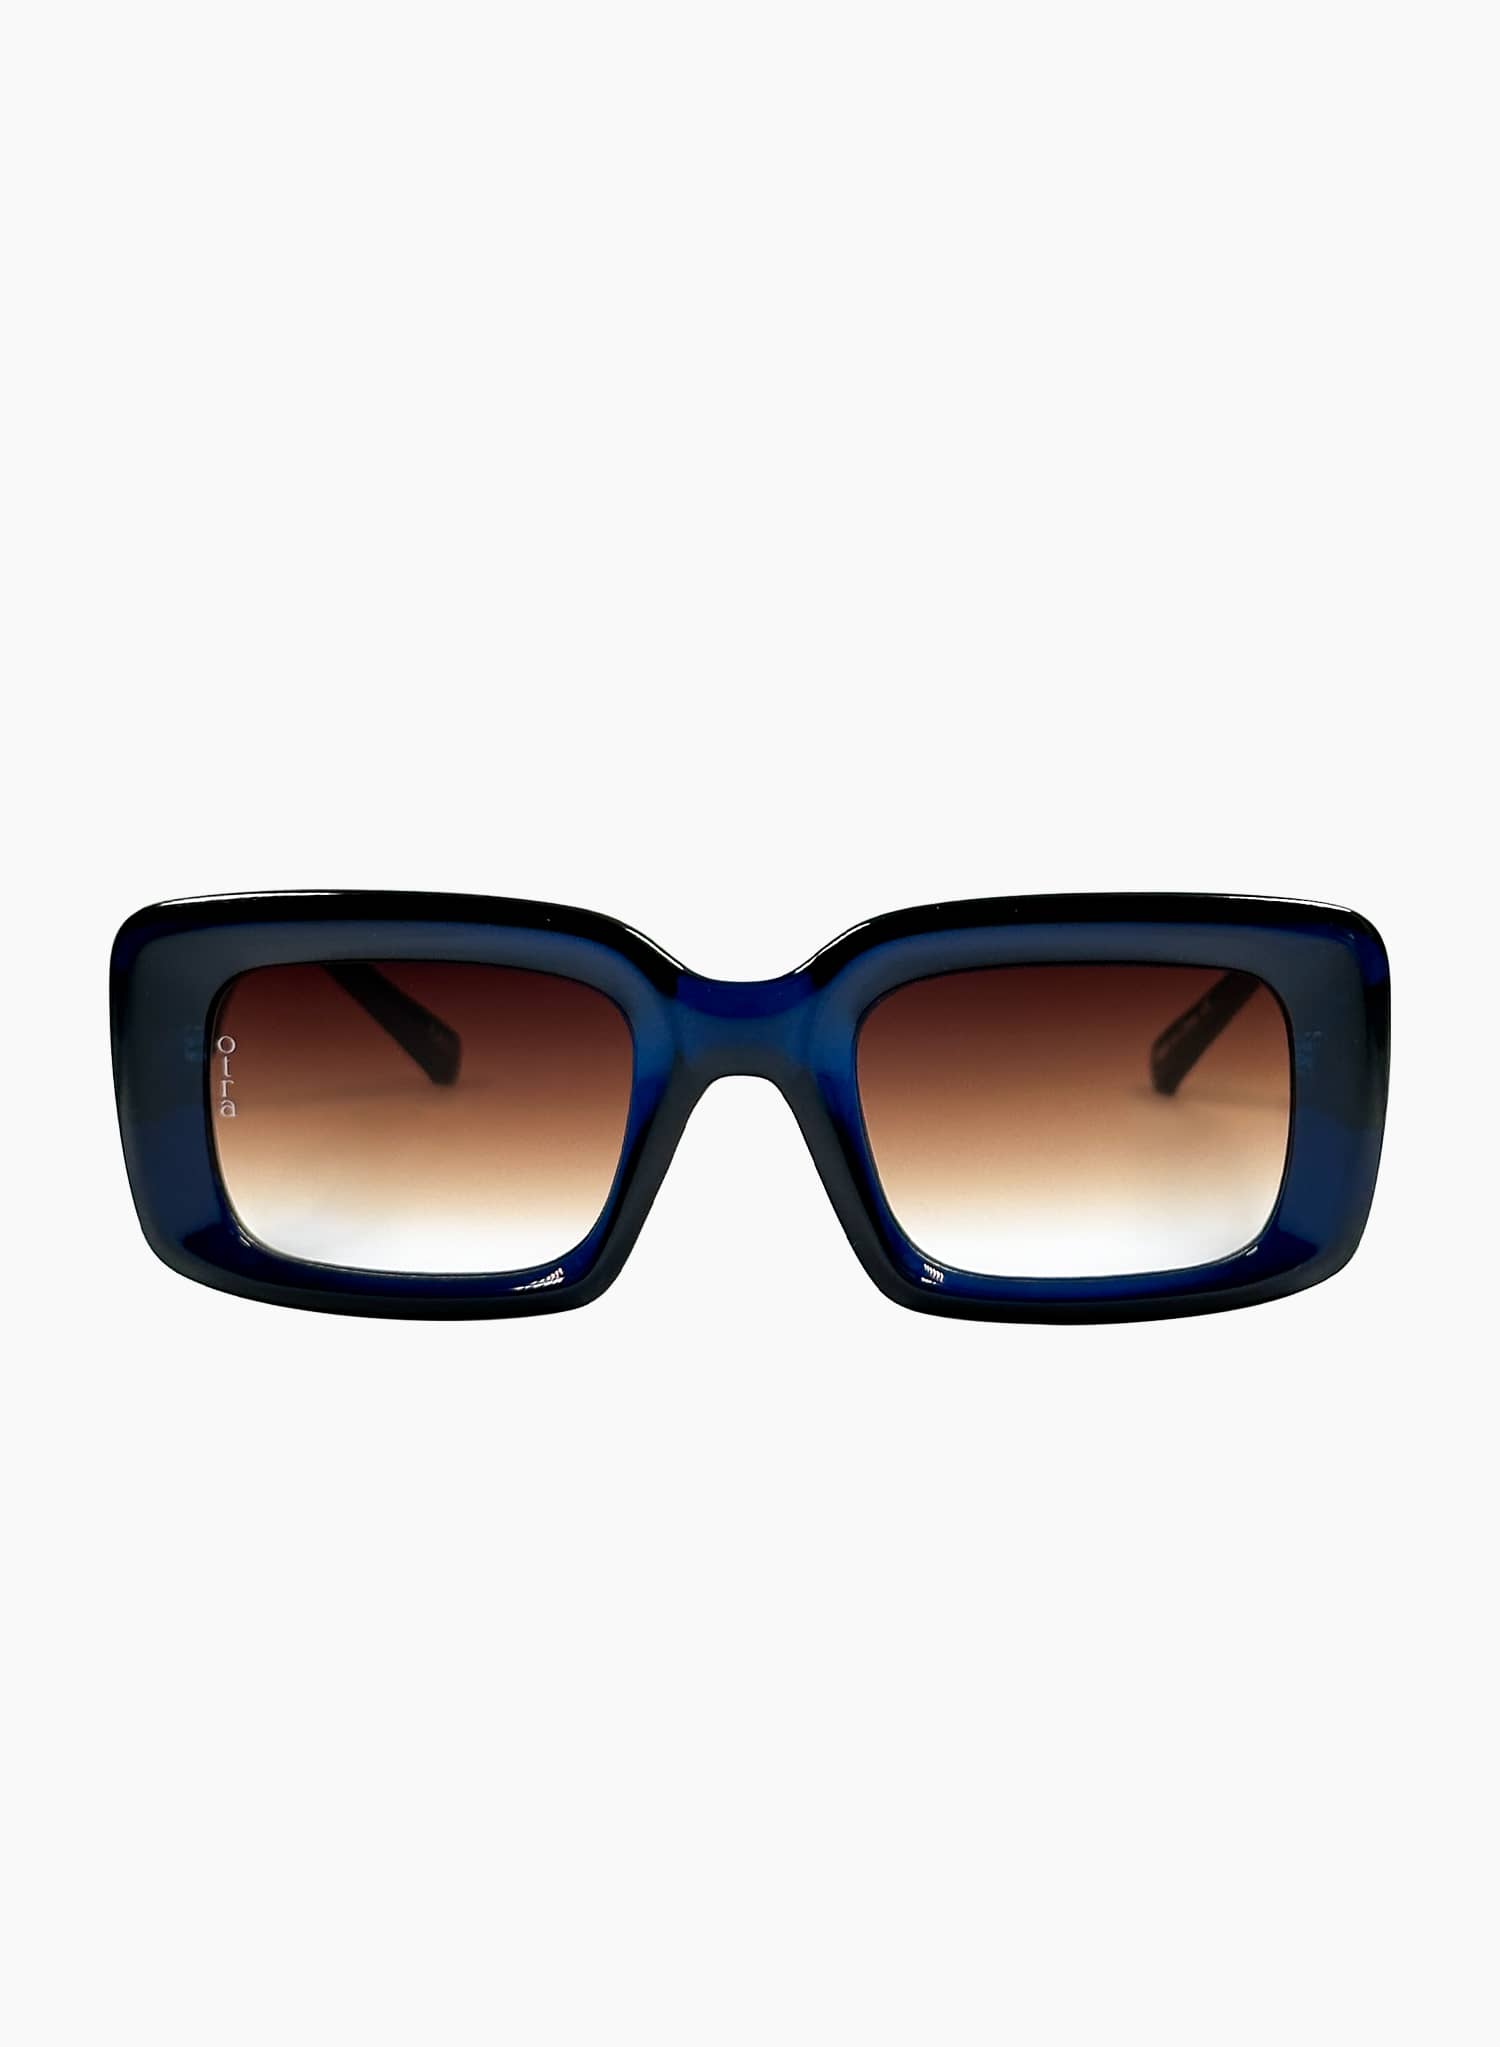 Chelsea oversized rectangle sunglasses in navy color